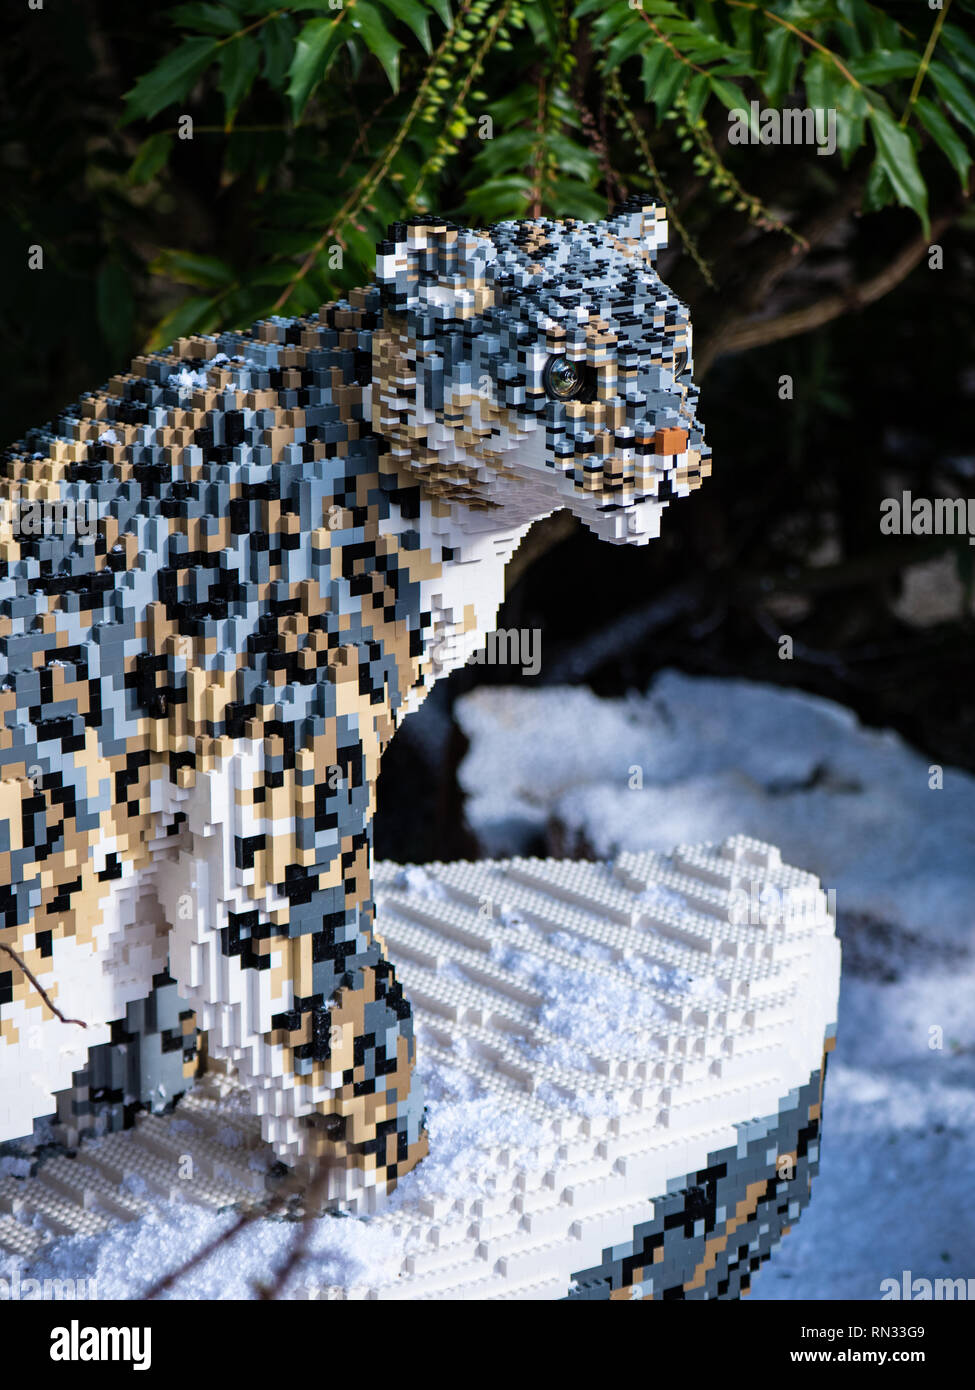 Snow leopard model, one of the lifesize Lego Big Cats at Chester Zoo Stock Photo